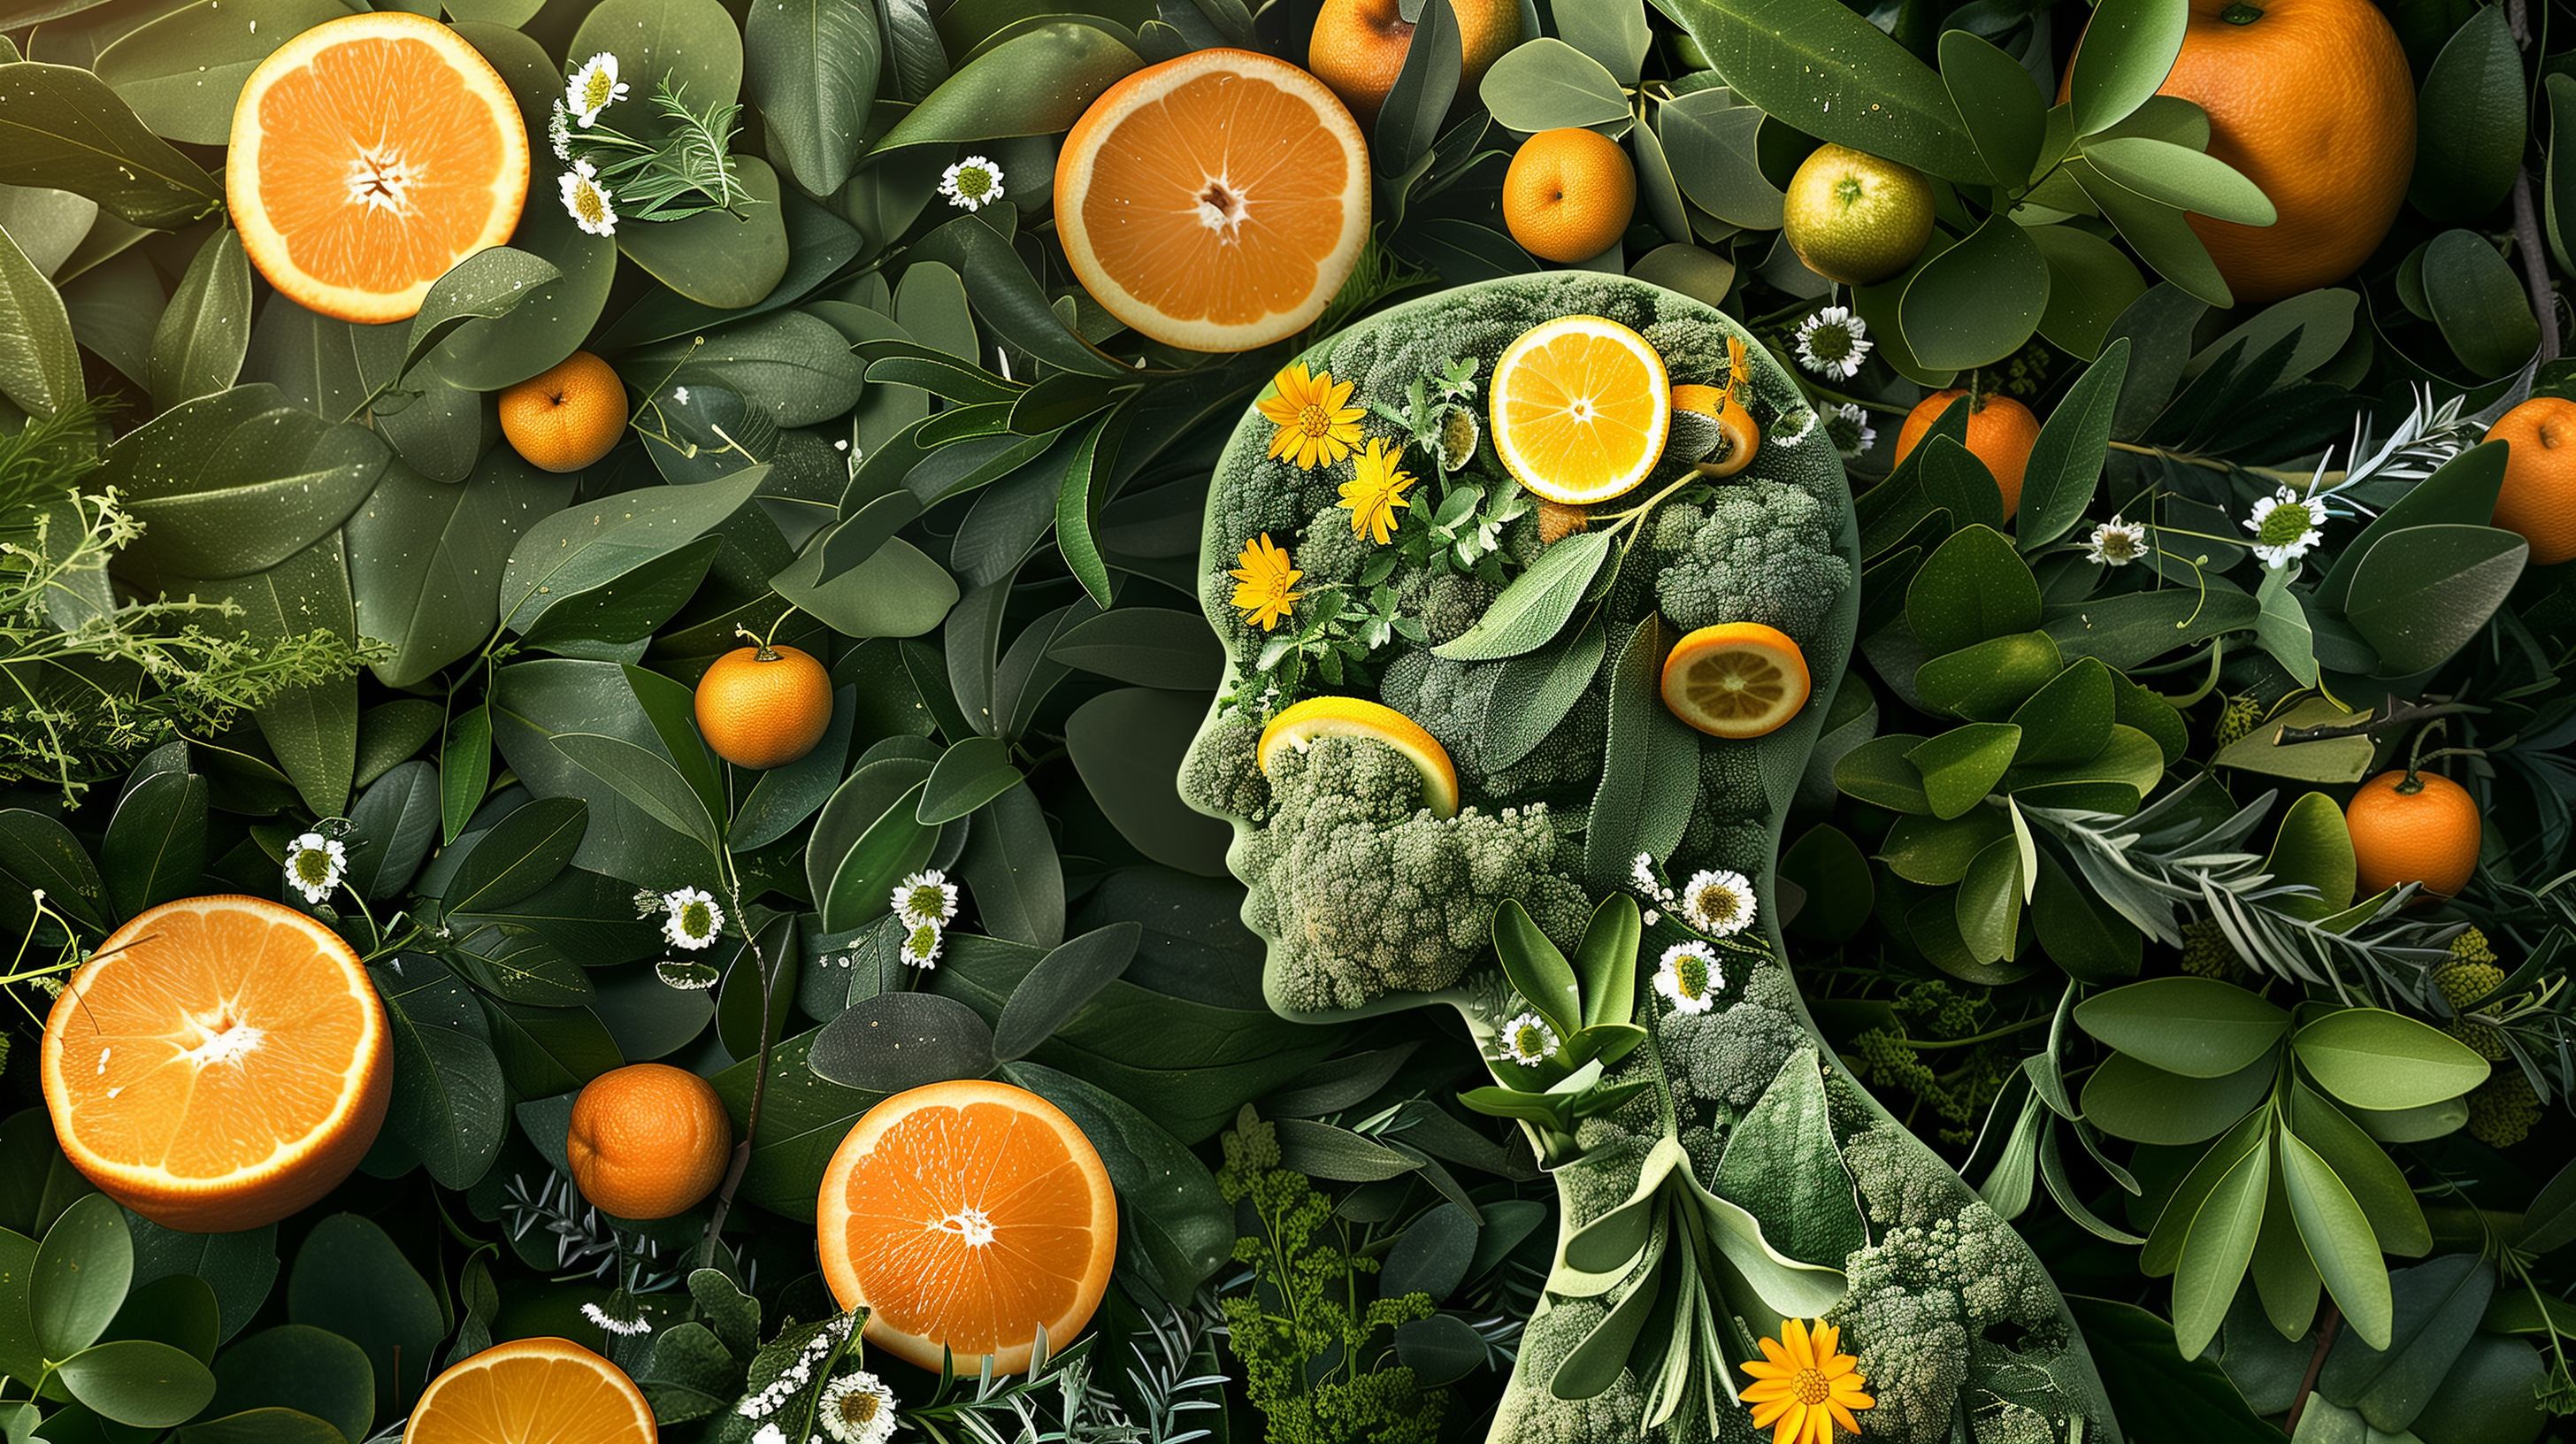 human silhouette filled with herbs like echinacea, garlic, and ginger, surrounded by fruits like oranges and lemons